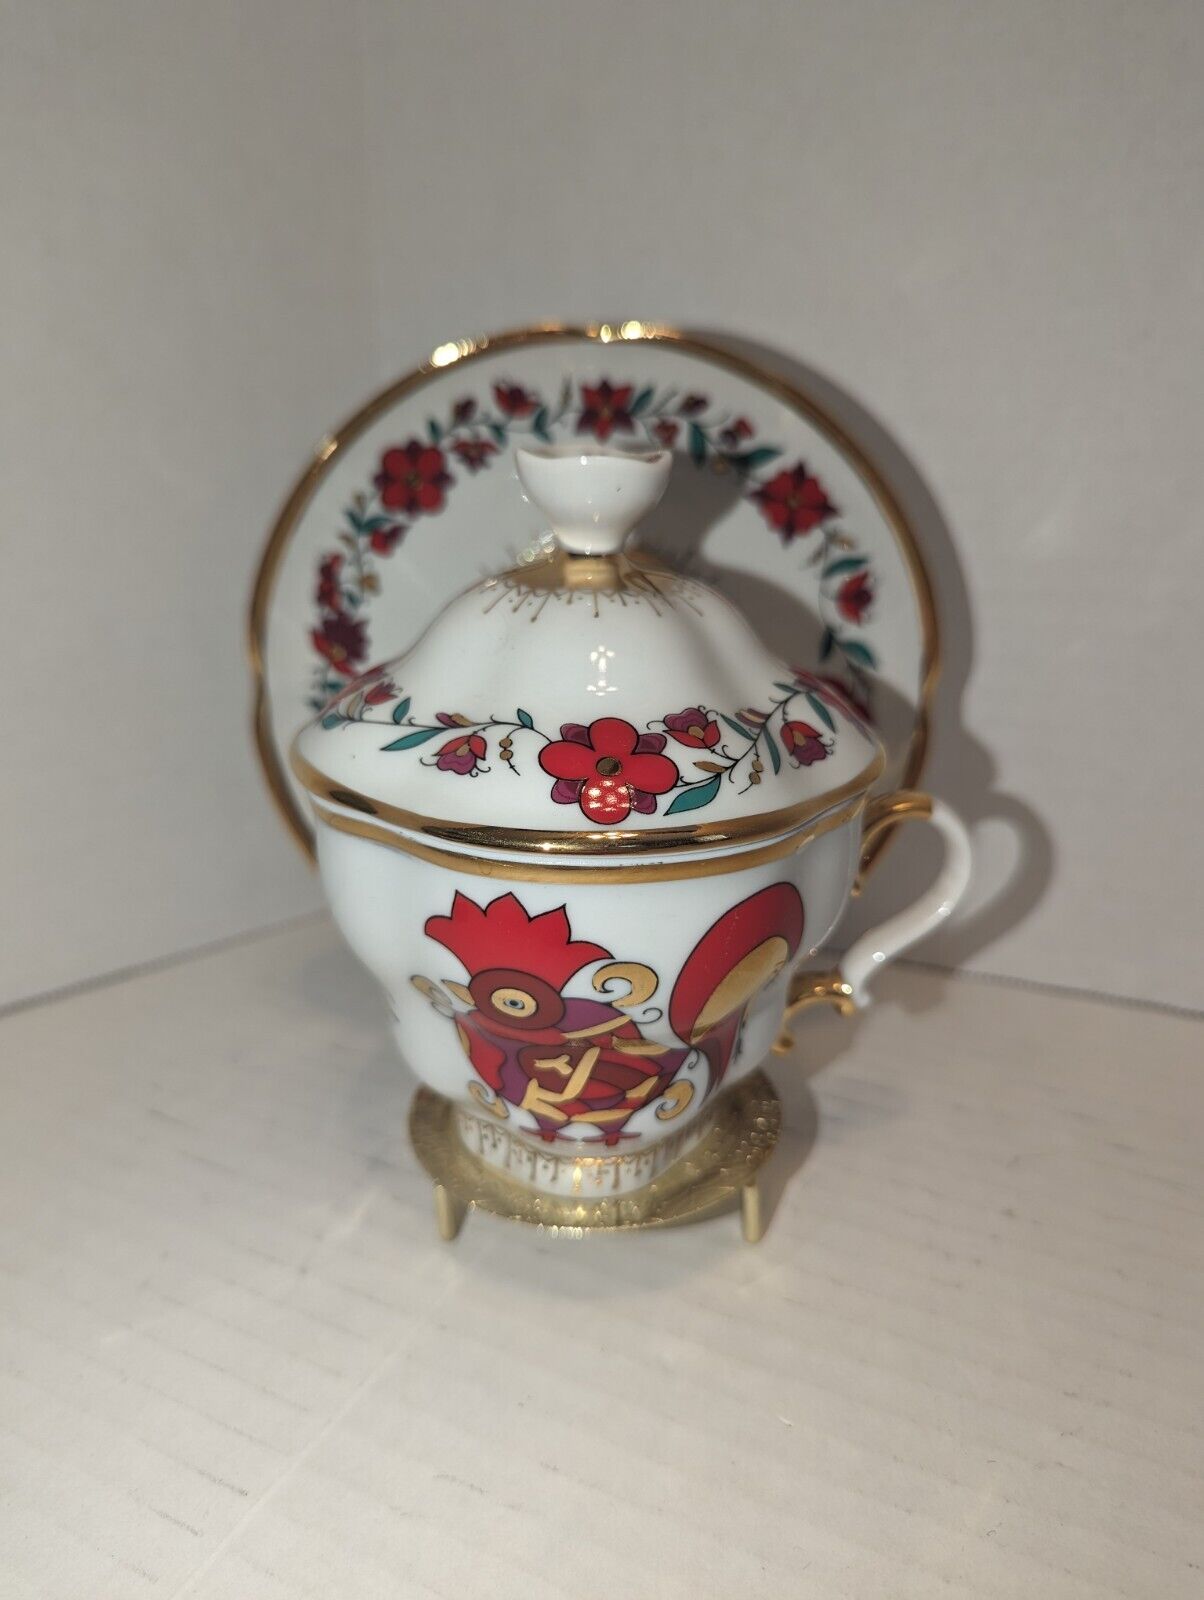 Imperial Lomonosov Porcelain St. Petersburg Russia Teacup with Lid and Saucer